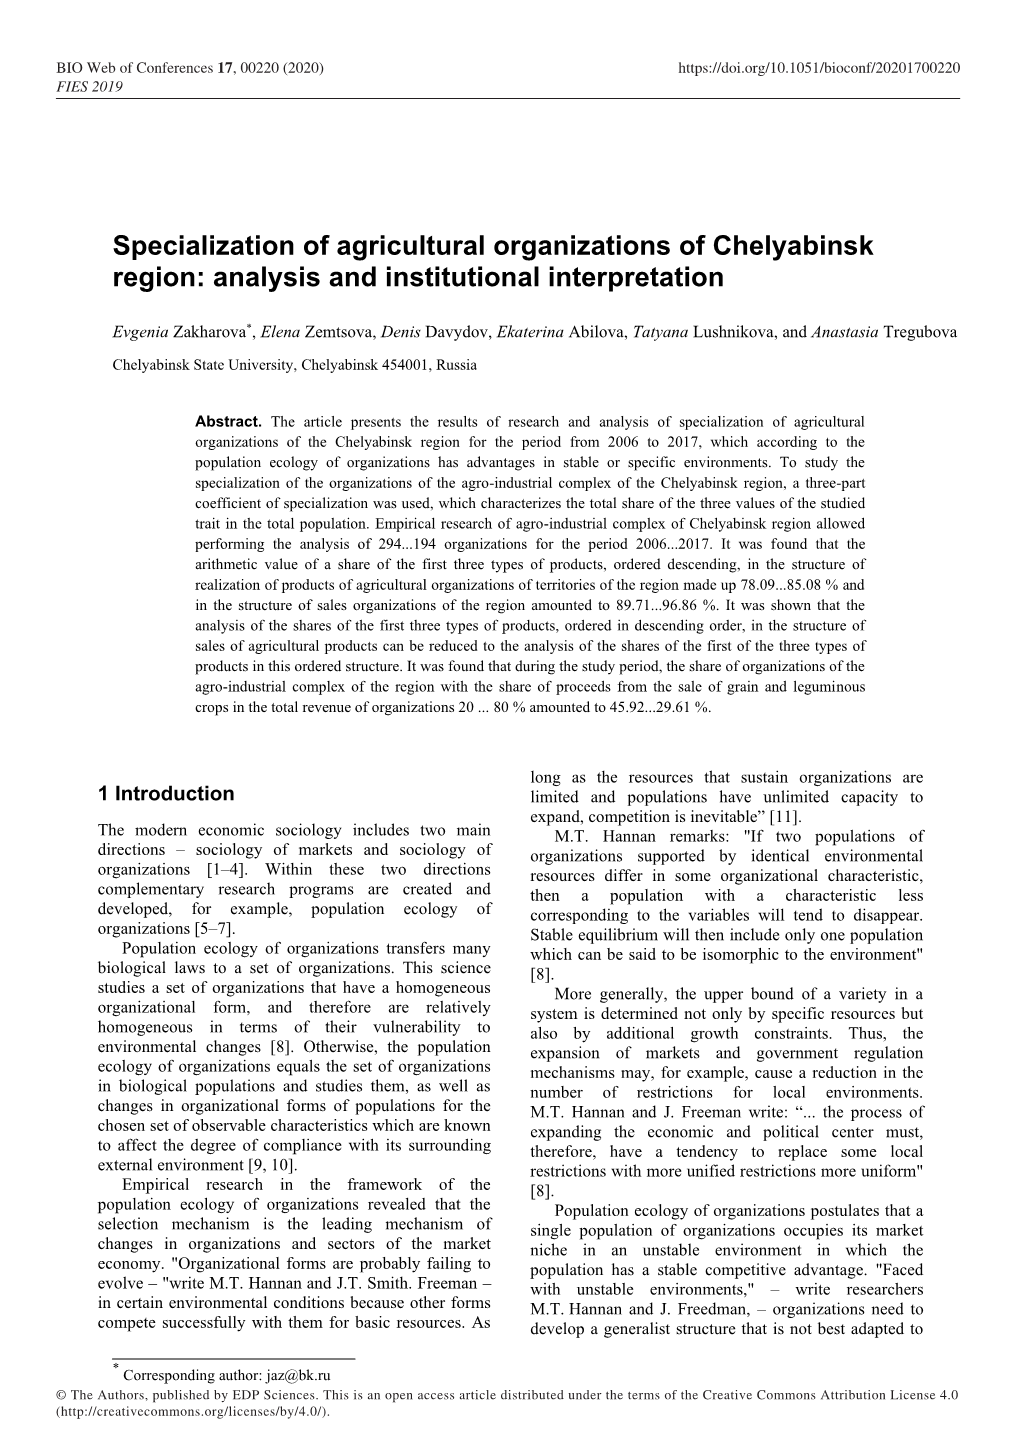 Specialization of Agricultural Organizations of Chelyabinsk Region: Analysis and Institutional Interpretation